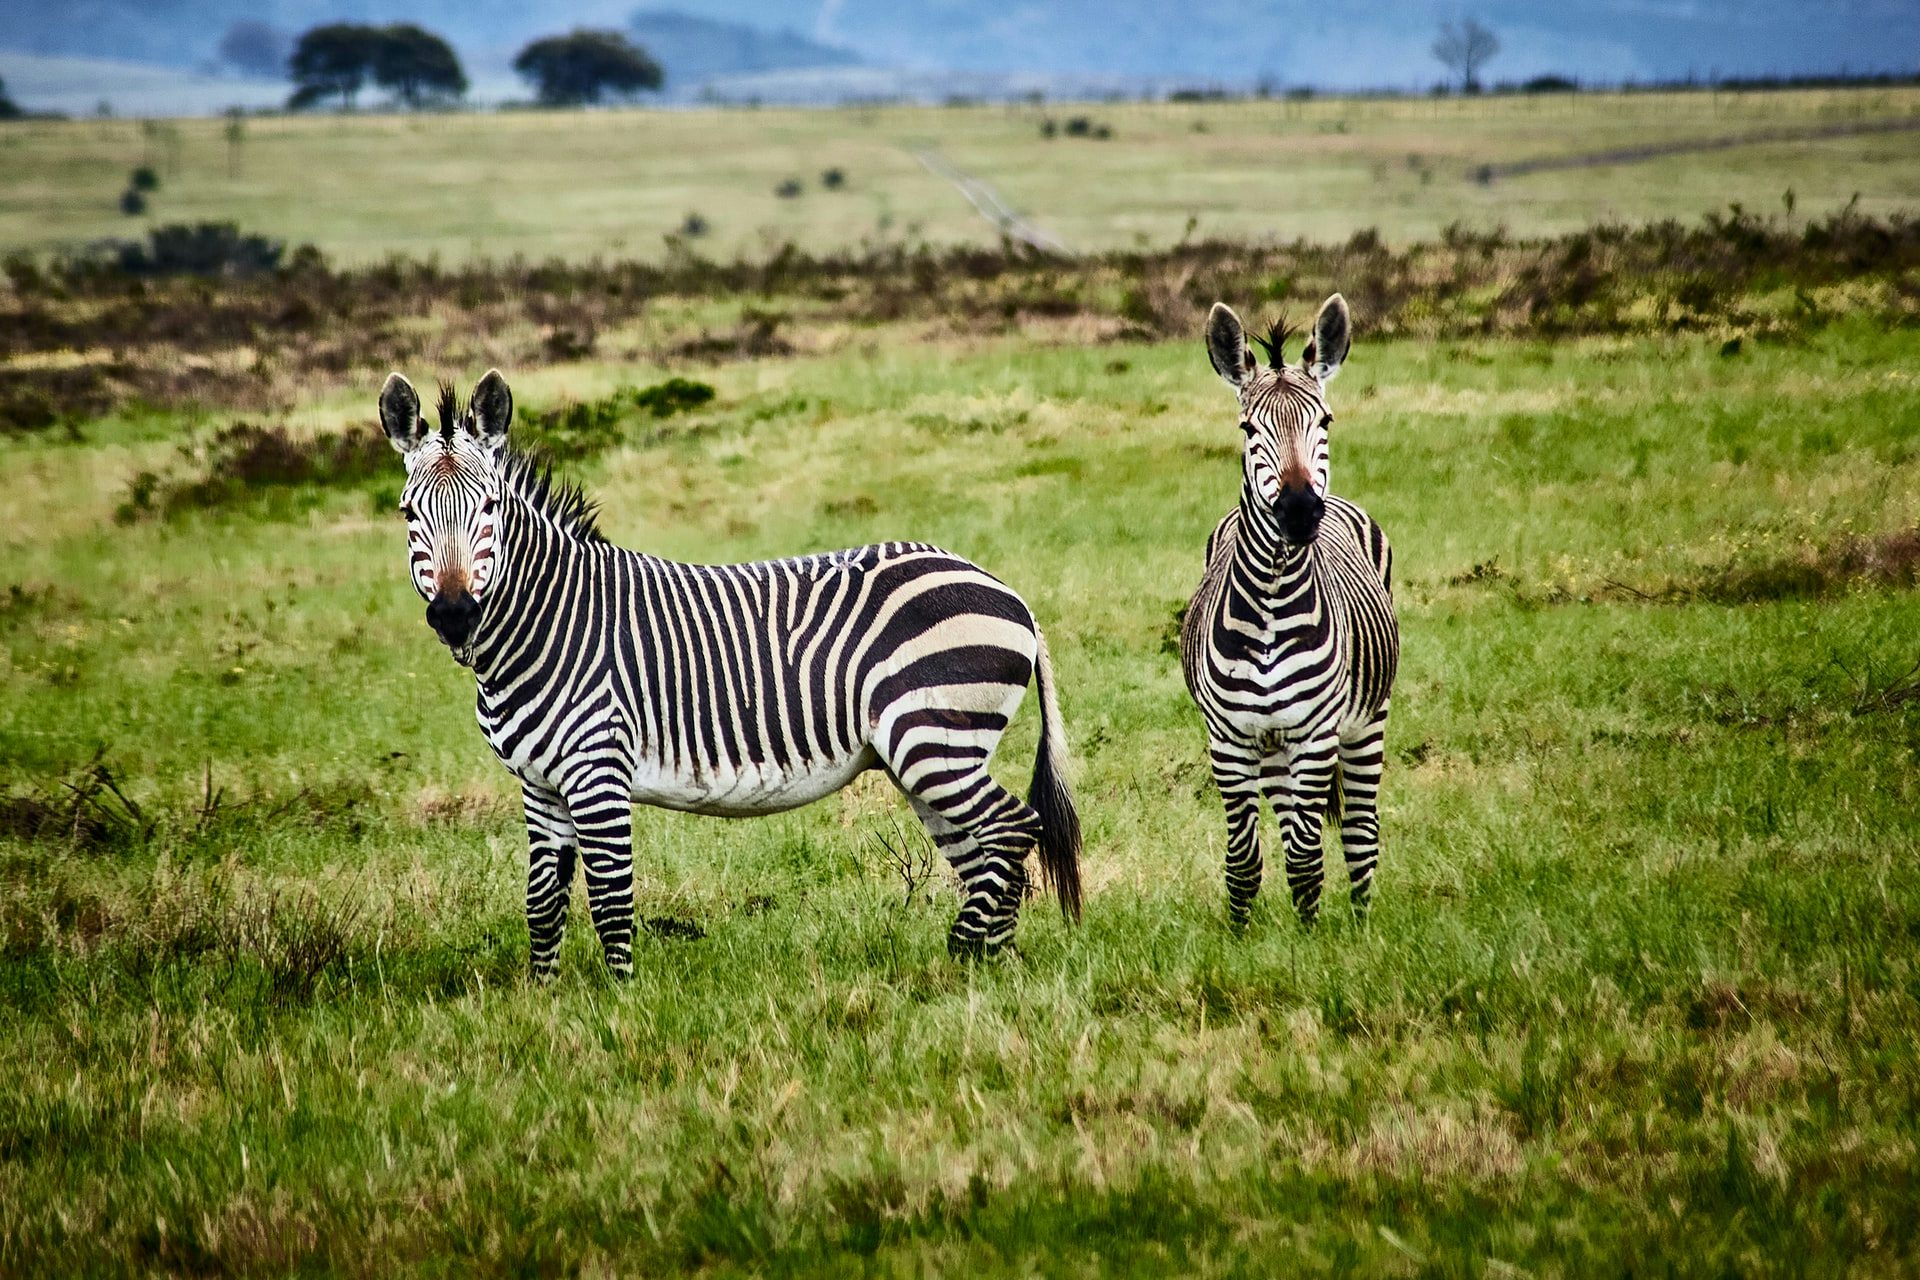 Want to know more about our safaris?